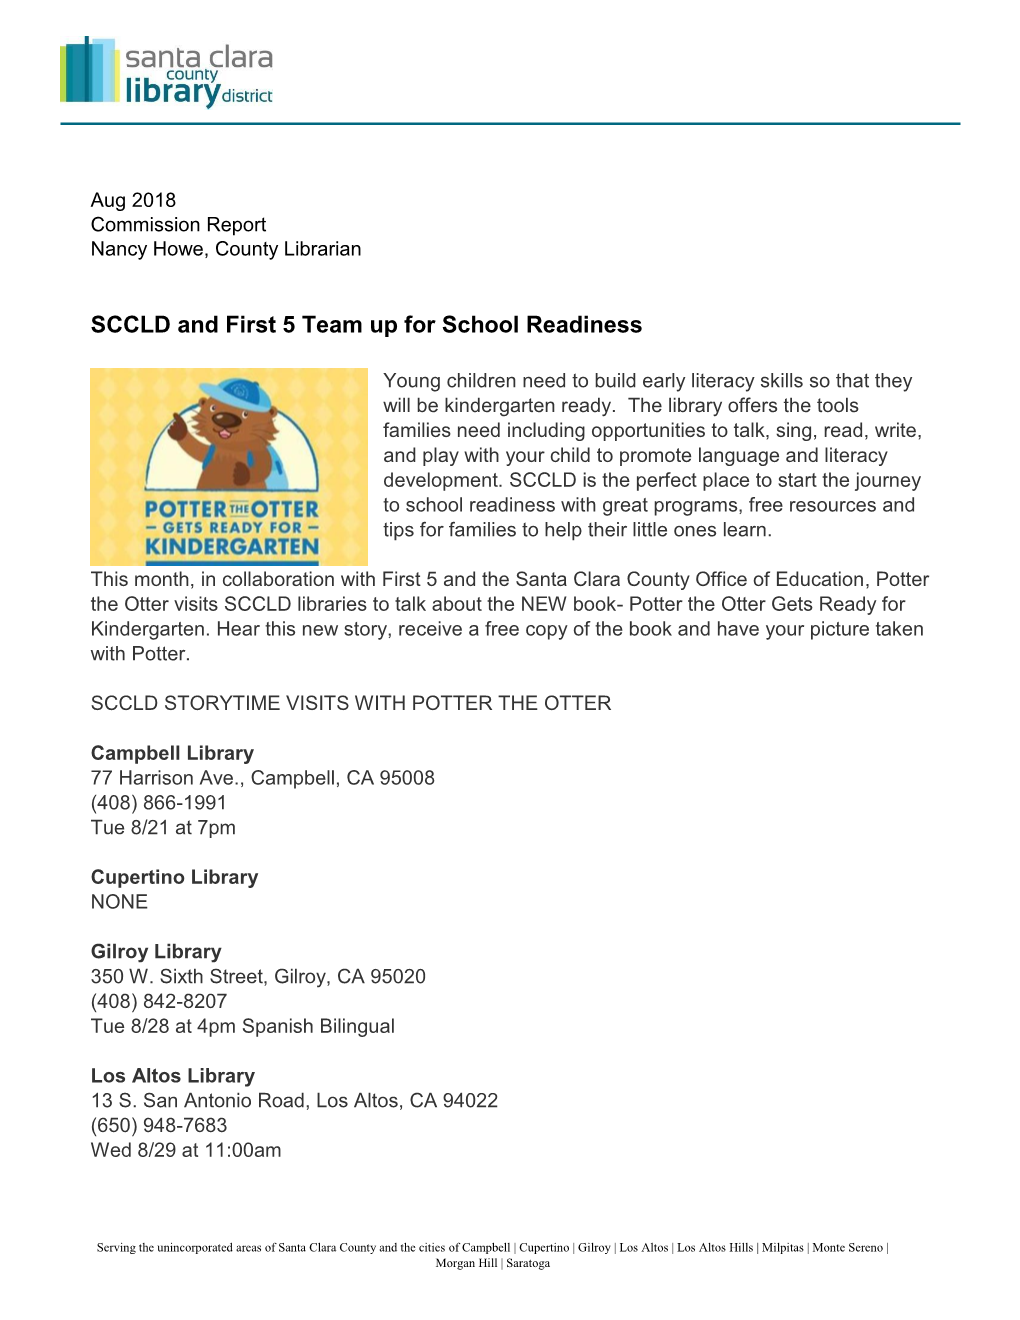 SCCLD and First 5 Team up for School Readiness